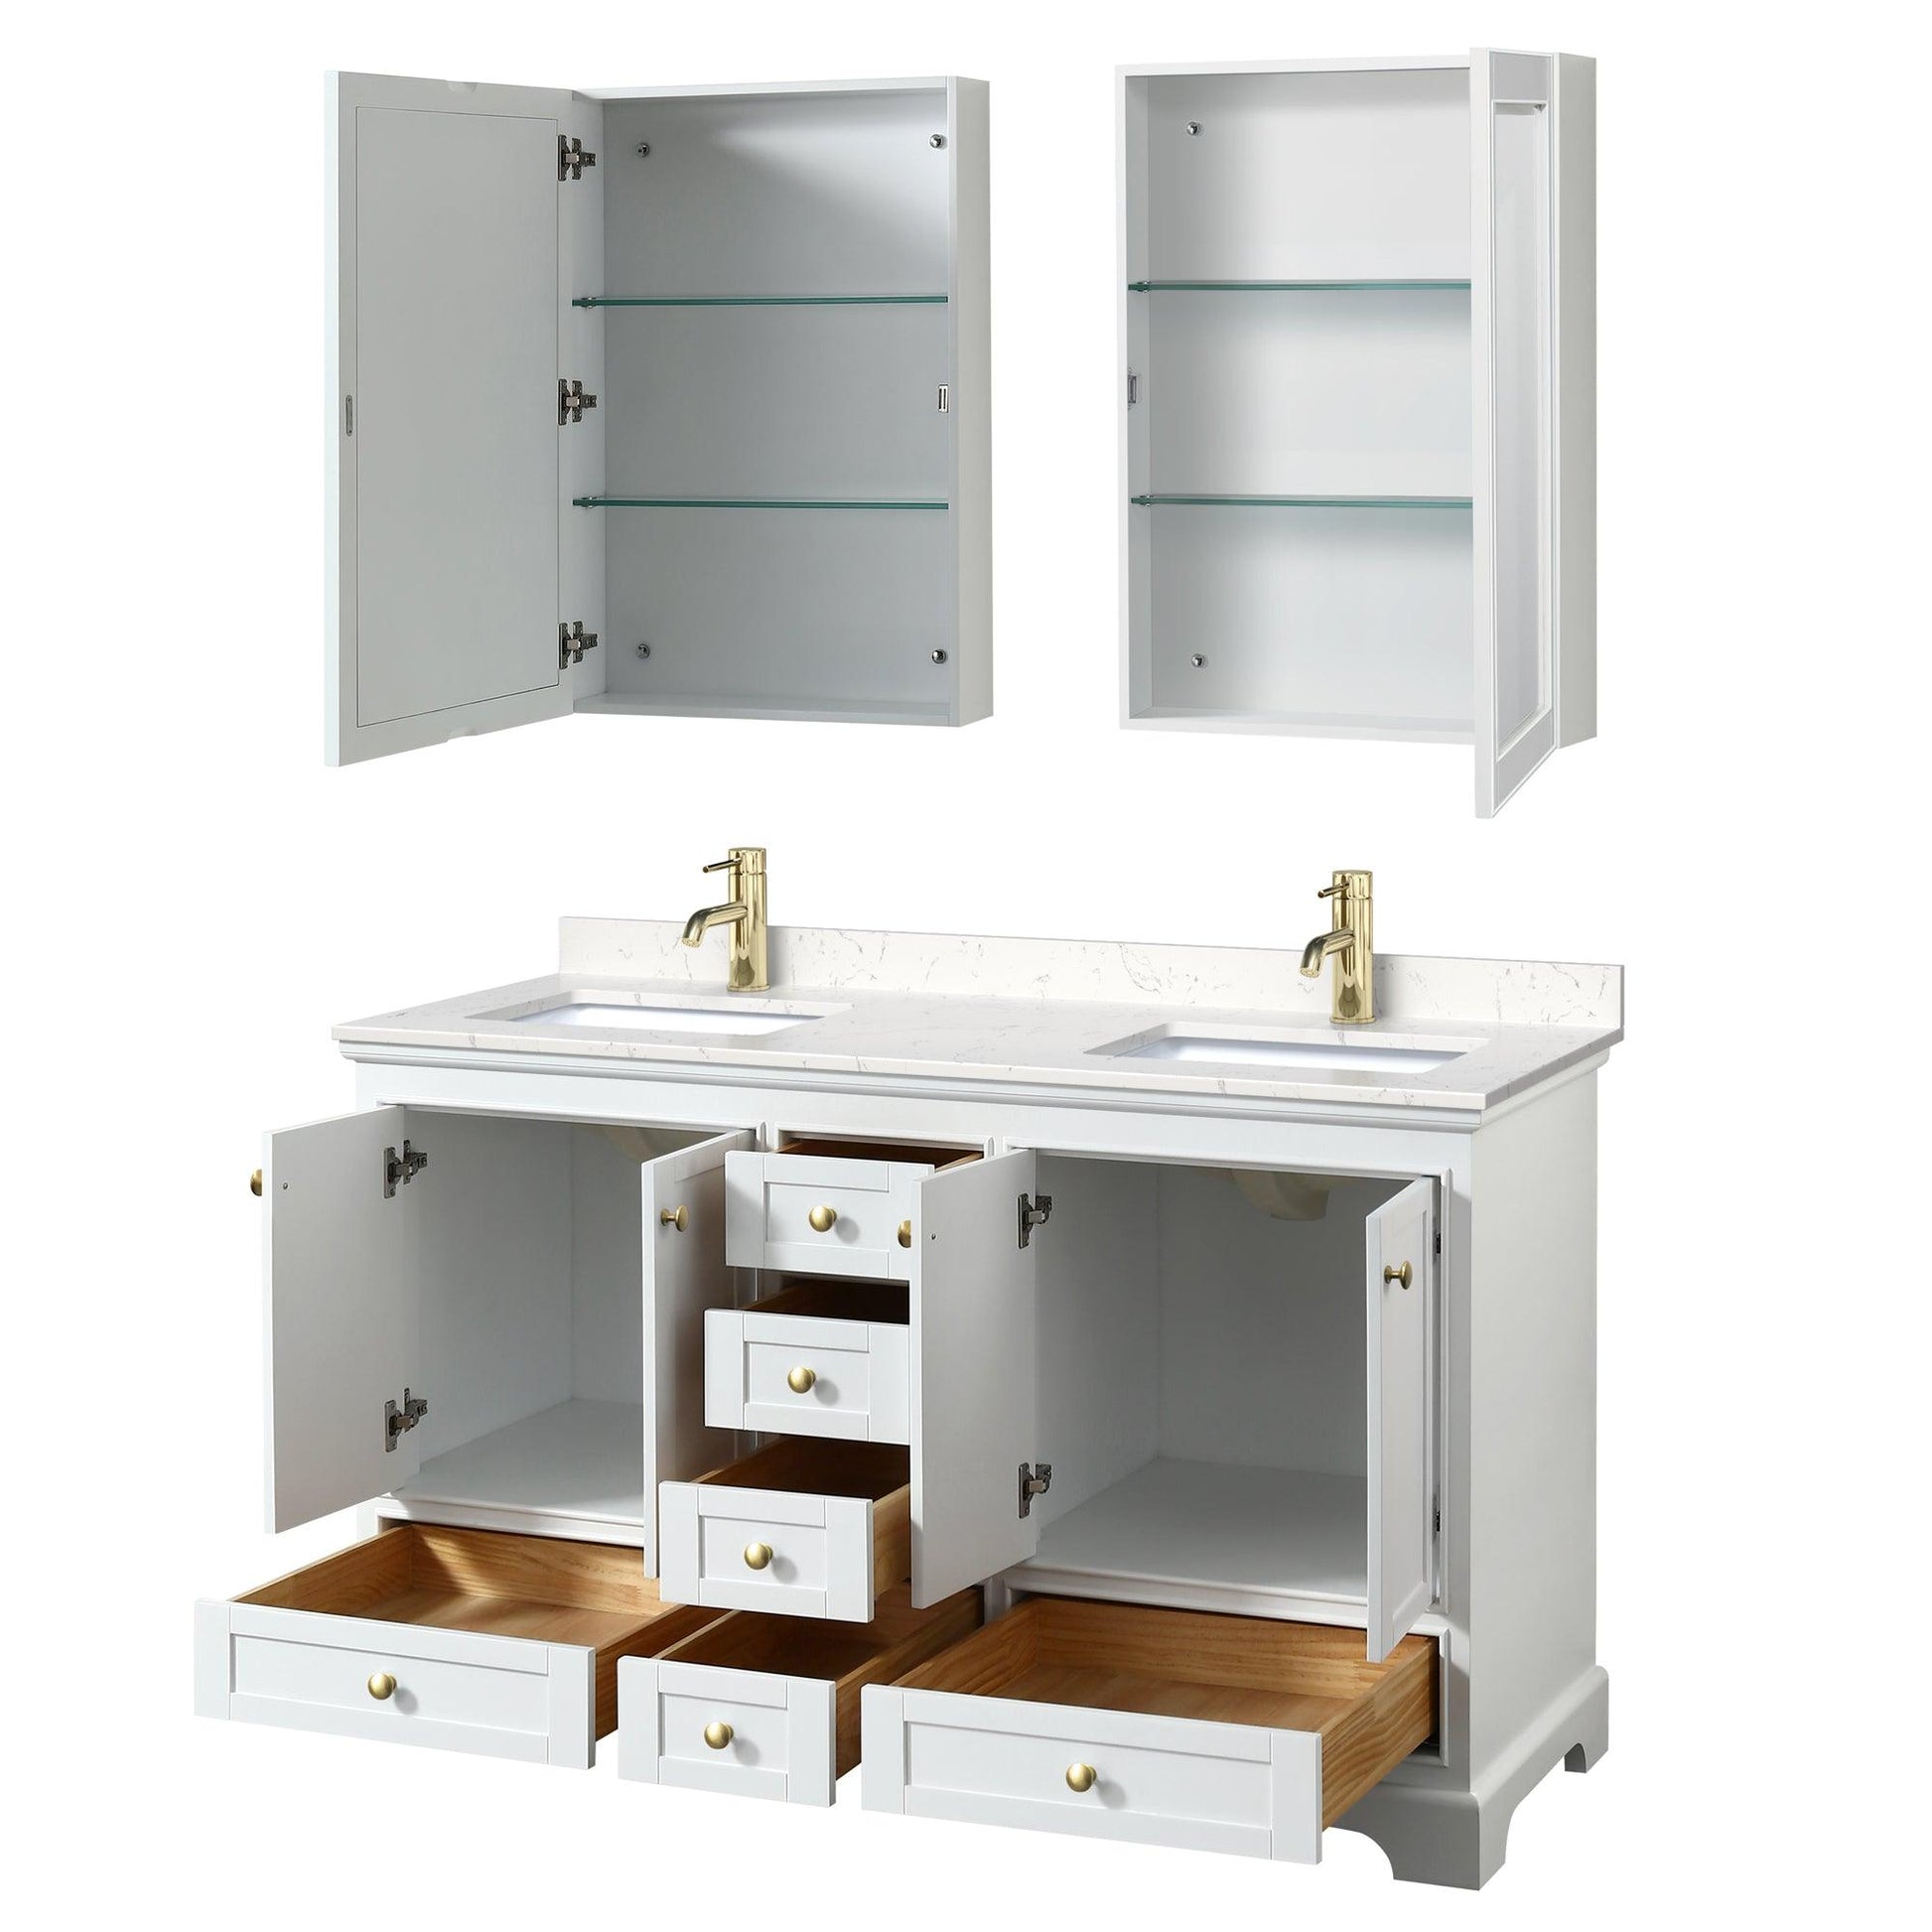 
  
  Wyndham Collection Deborah Double Bathroom Vanity in White, Carrara Cultured Marble Countertop, Undermount Square Sinks, Brushed Gold Trim, Optional 24 Inch Mirrors/Medicine Cabinets
  
